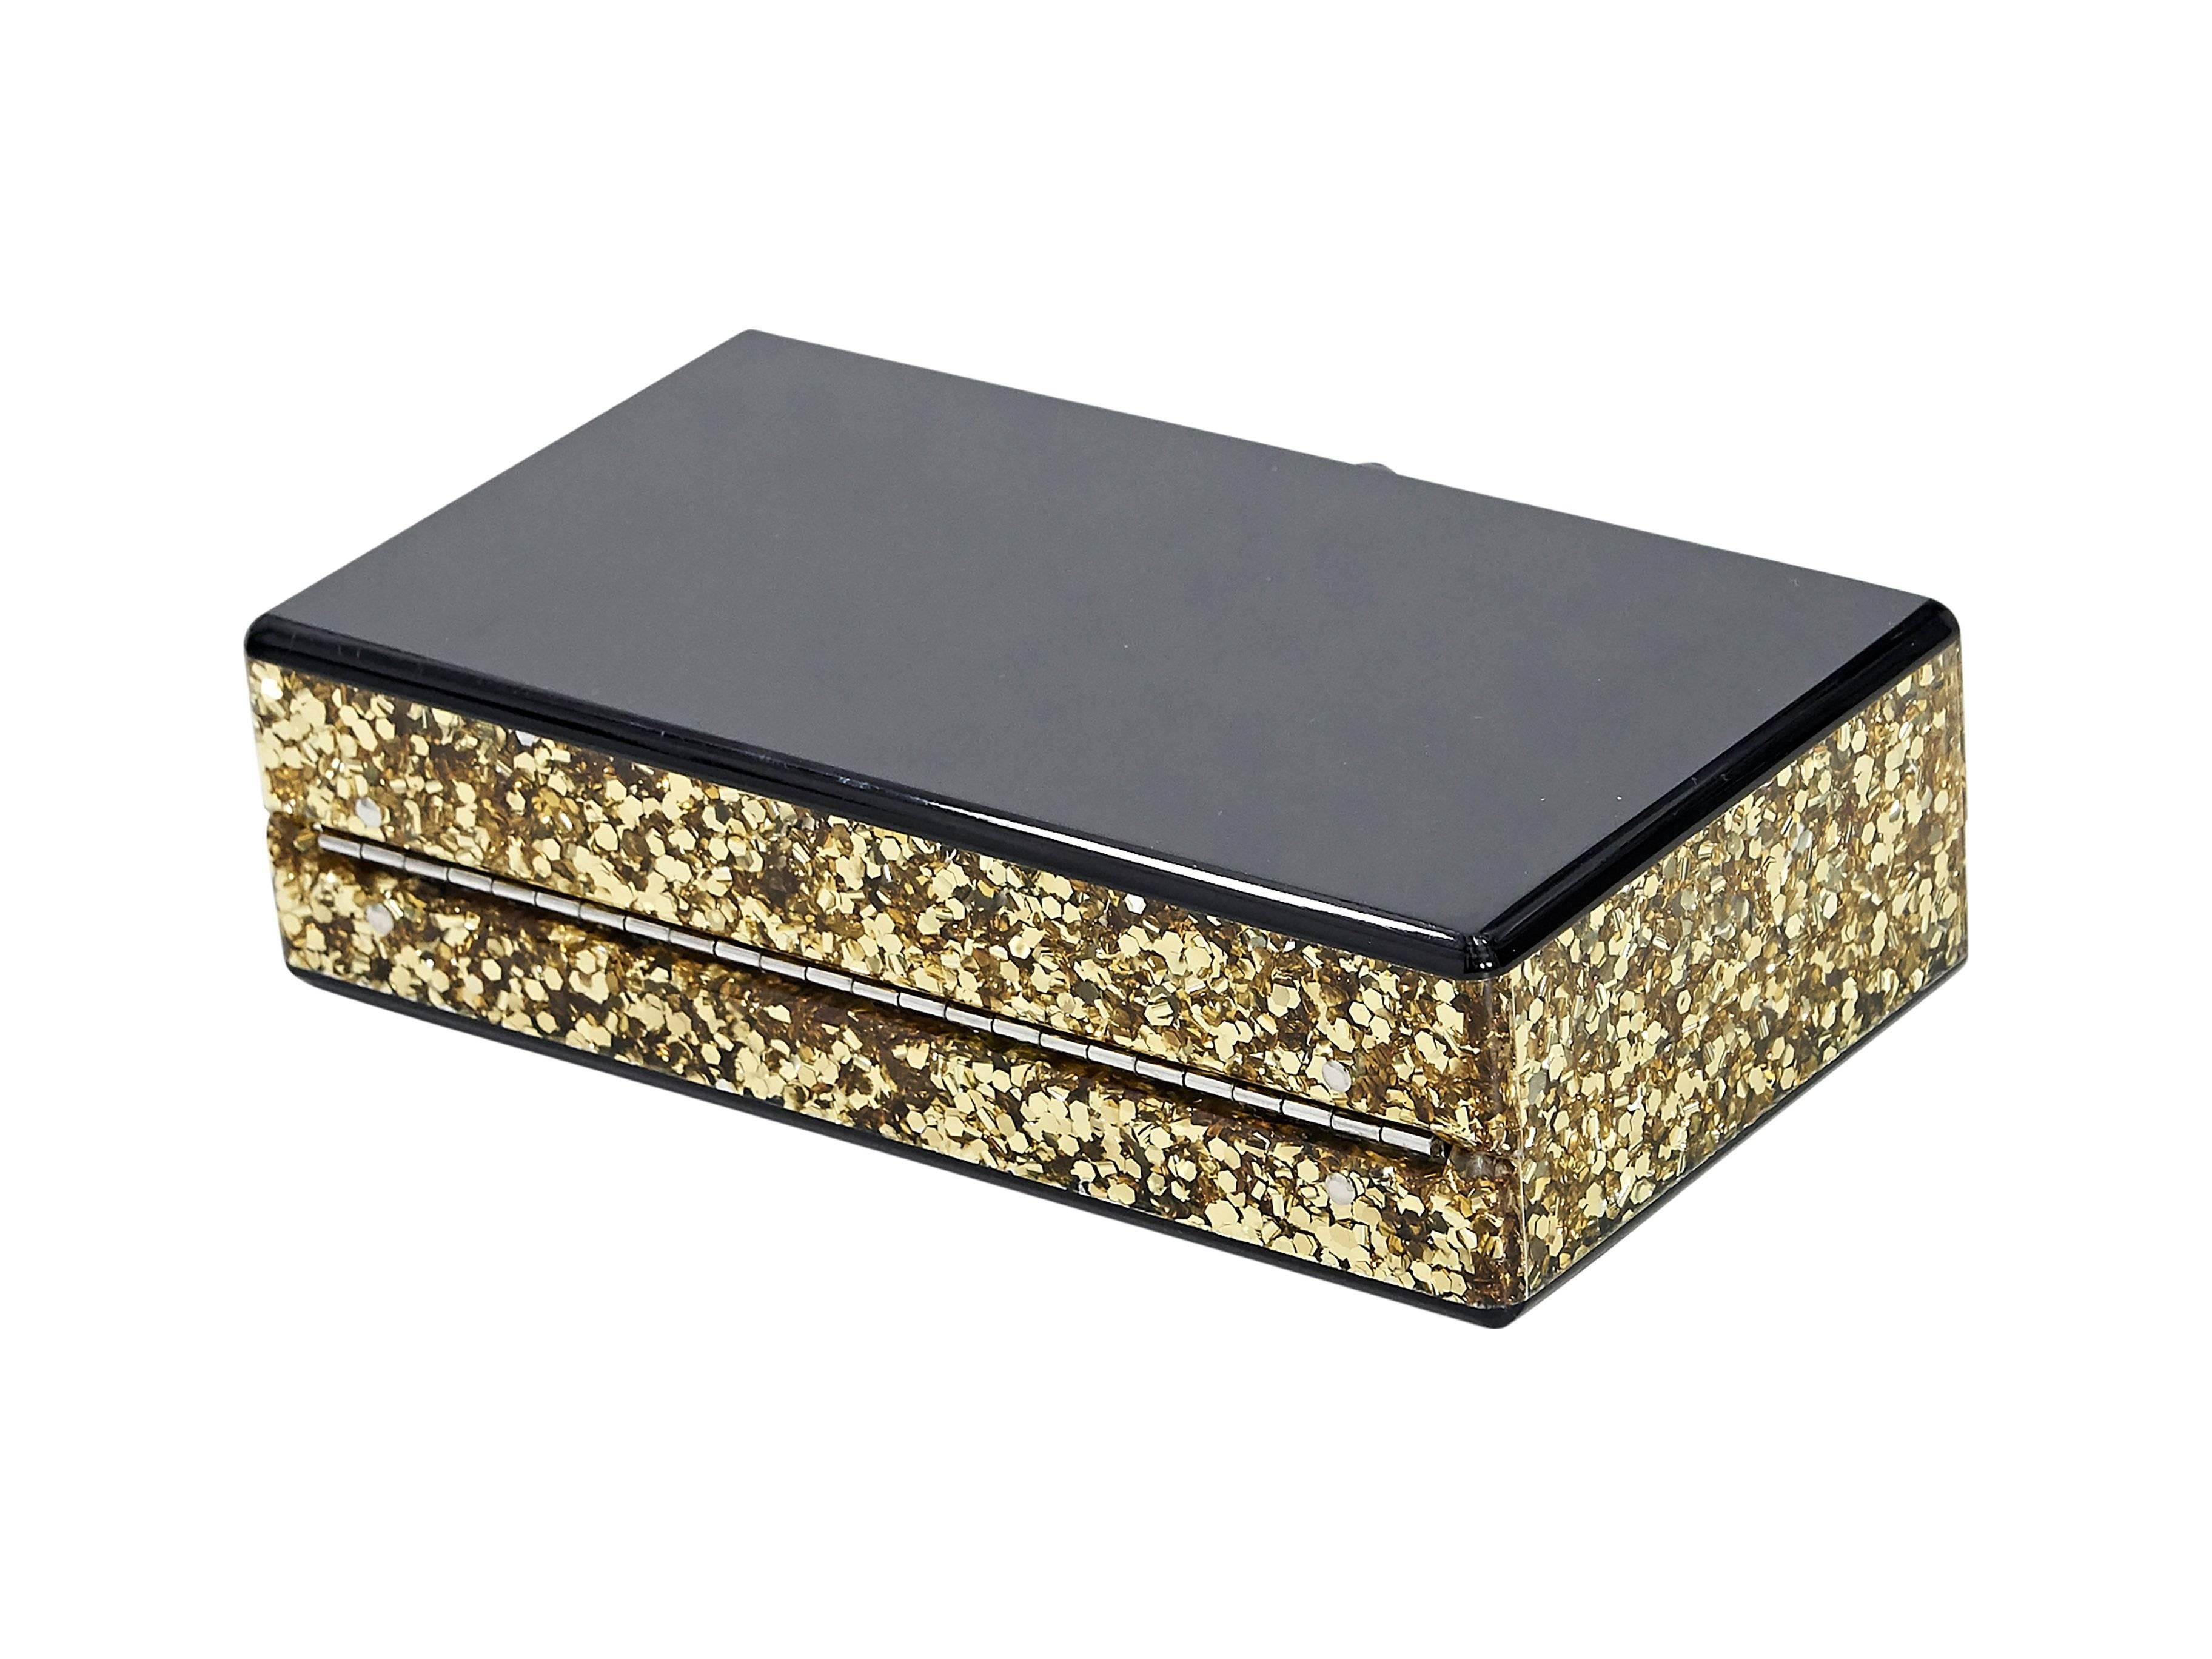 Product details:  Black acrylic box clutch by Edie Parker.  Gold glitter sides.  Top flip-lock closure.  Inner mirror.  6.75